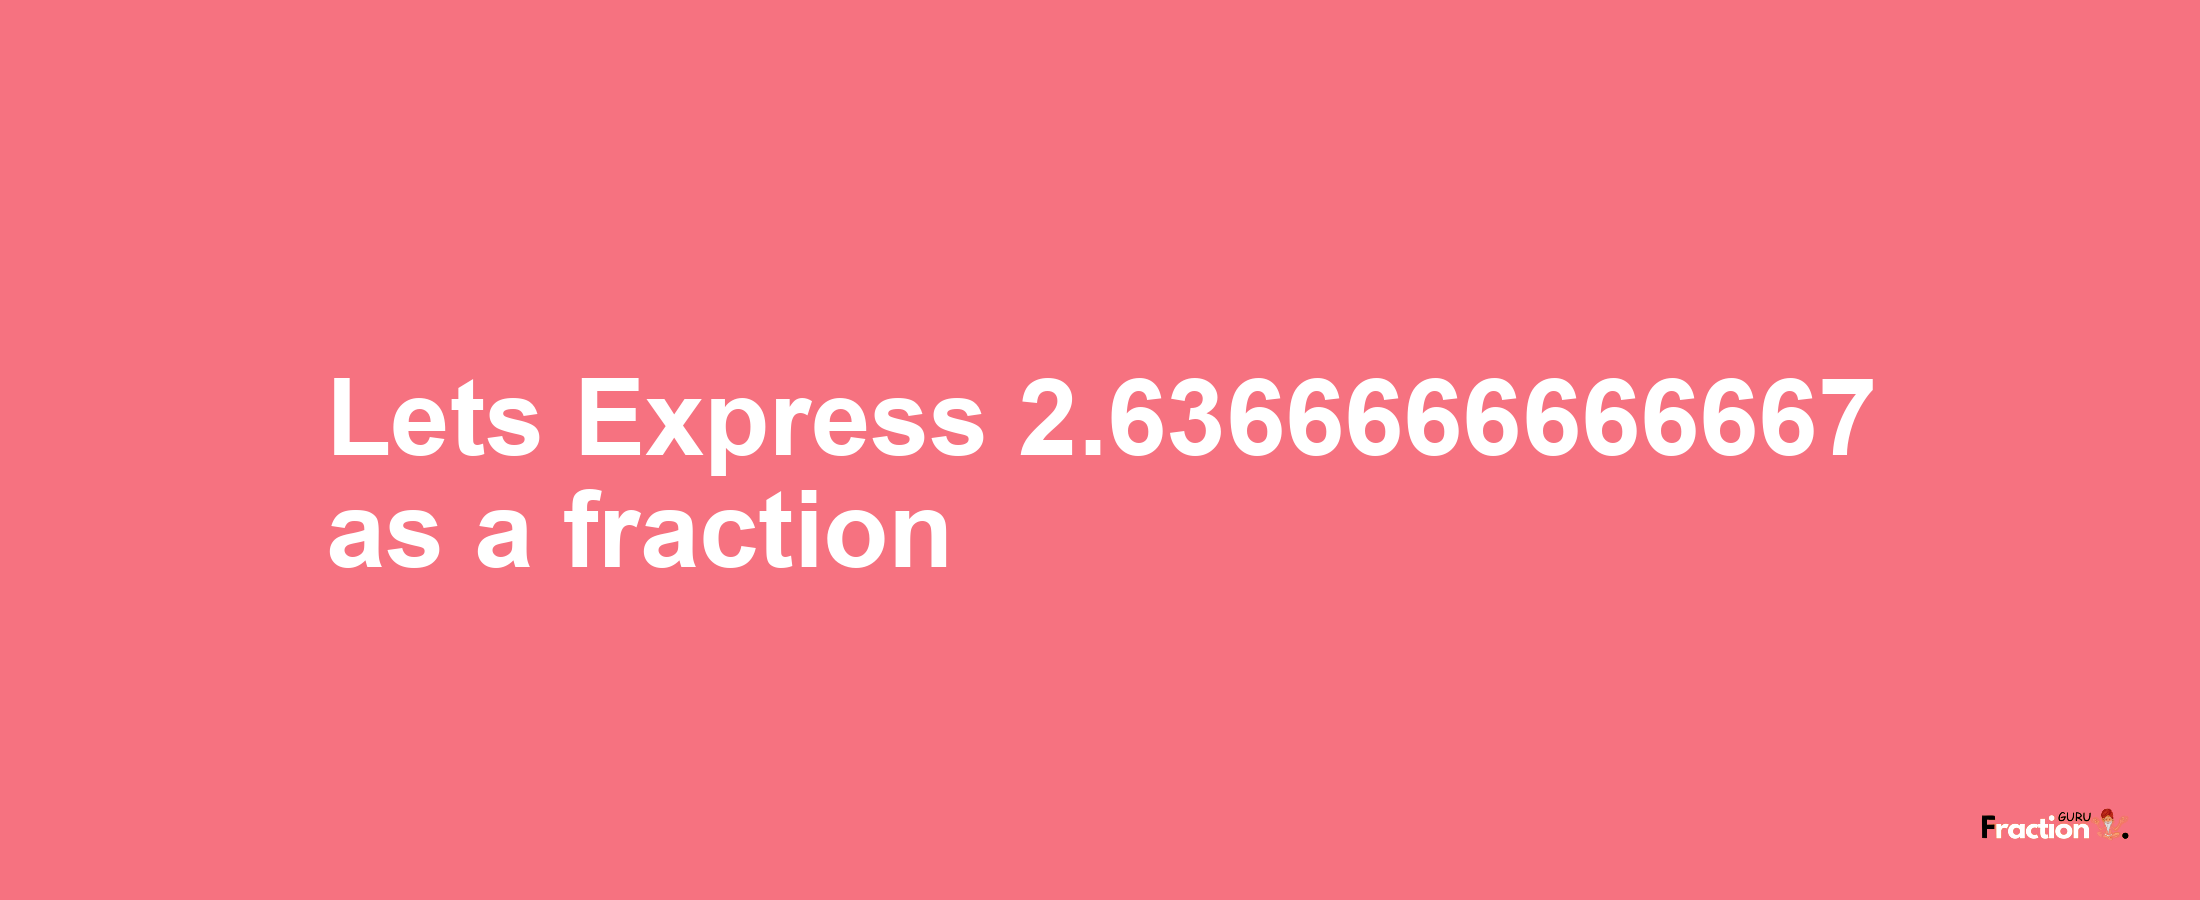 Lets Express 2.6366666666667 as afraction